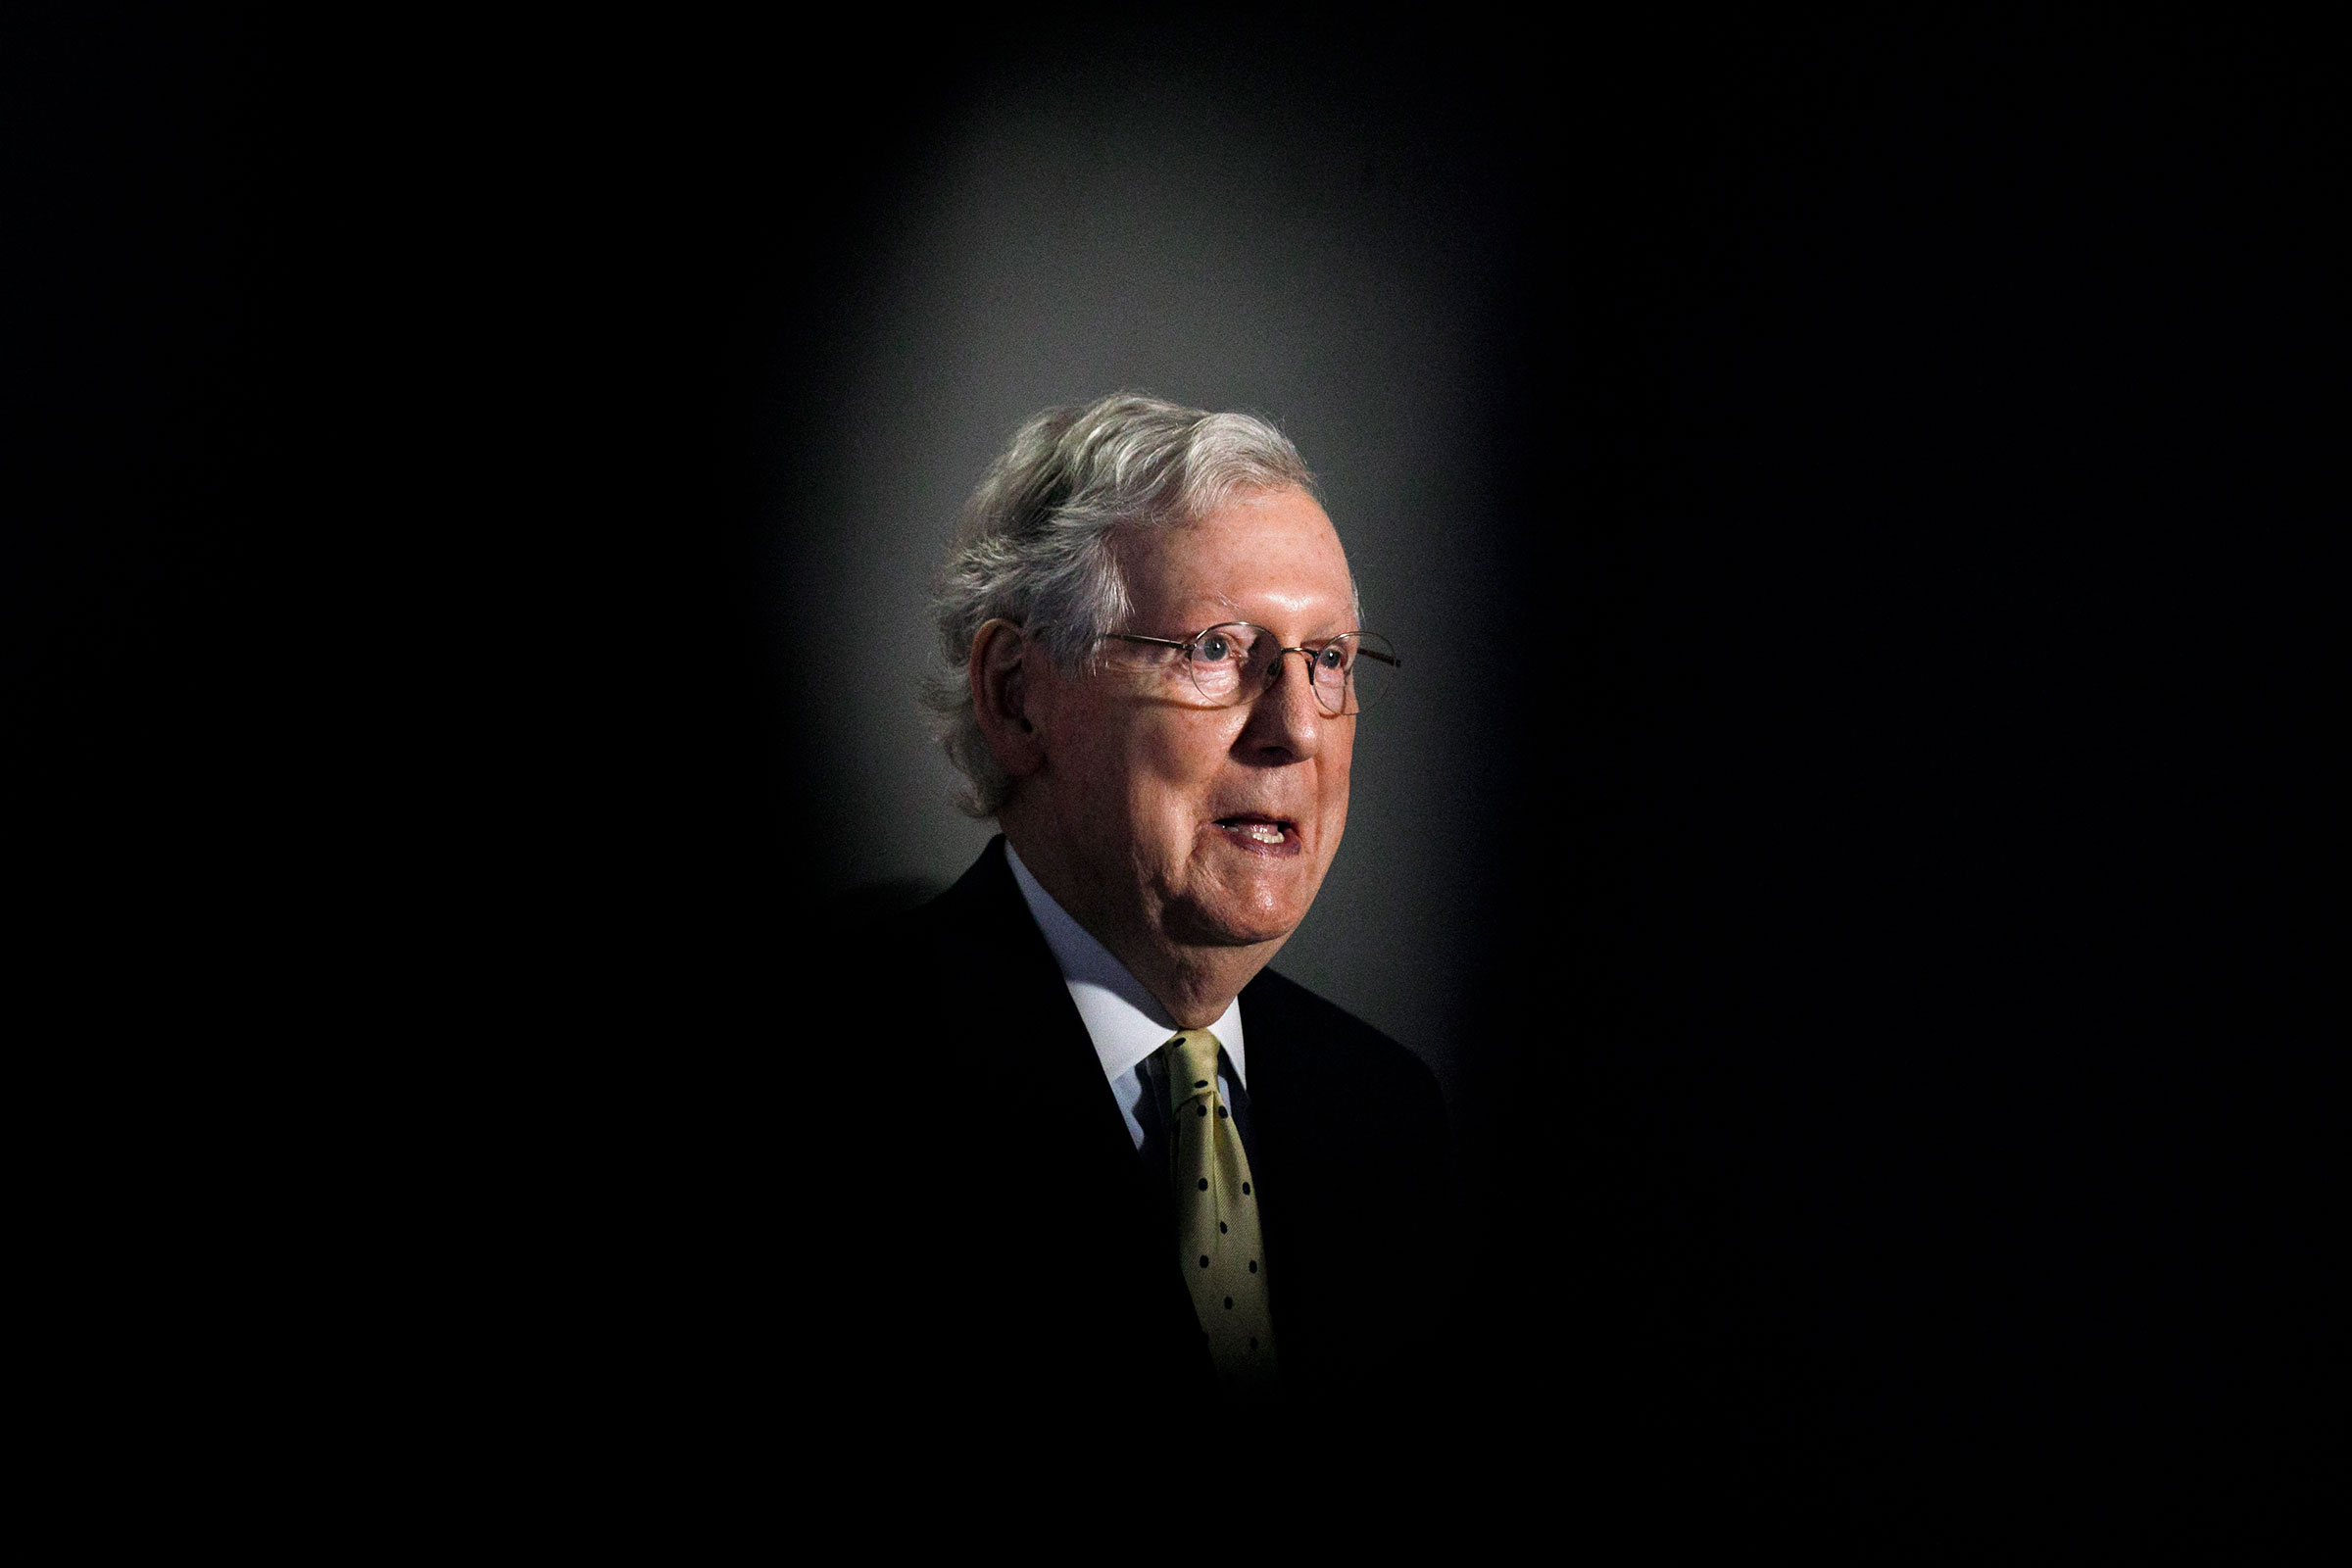 Senate Majority Leader Mitch McConnell of Ky., speaks during a news conference after attending a Republican luncheon on Capitol Hill in Washington on July 21, 2020. (Jacquelyn Martin—AP)